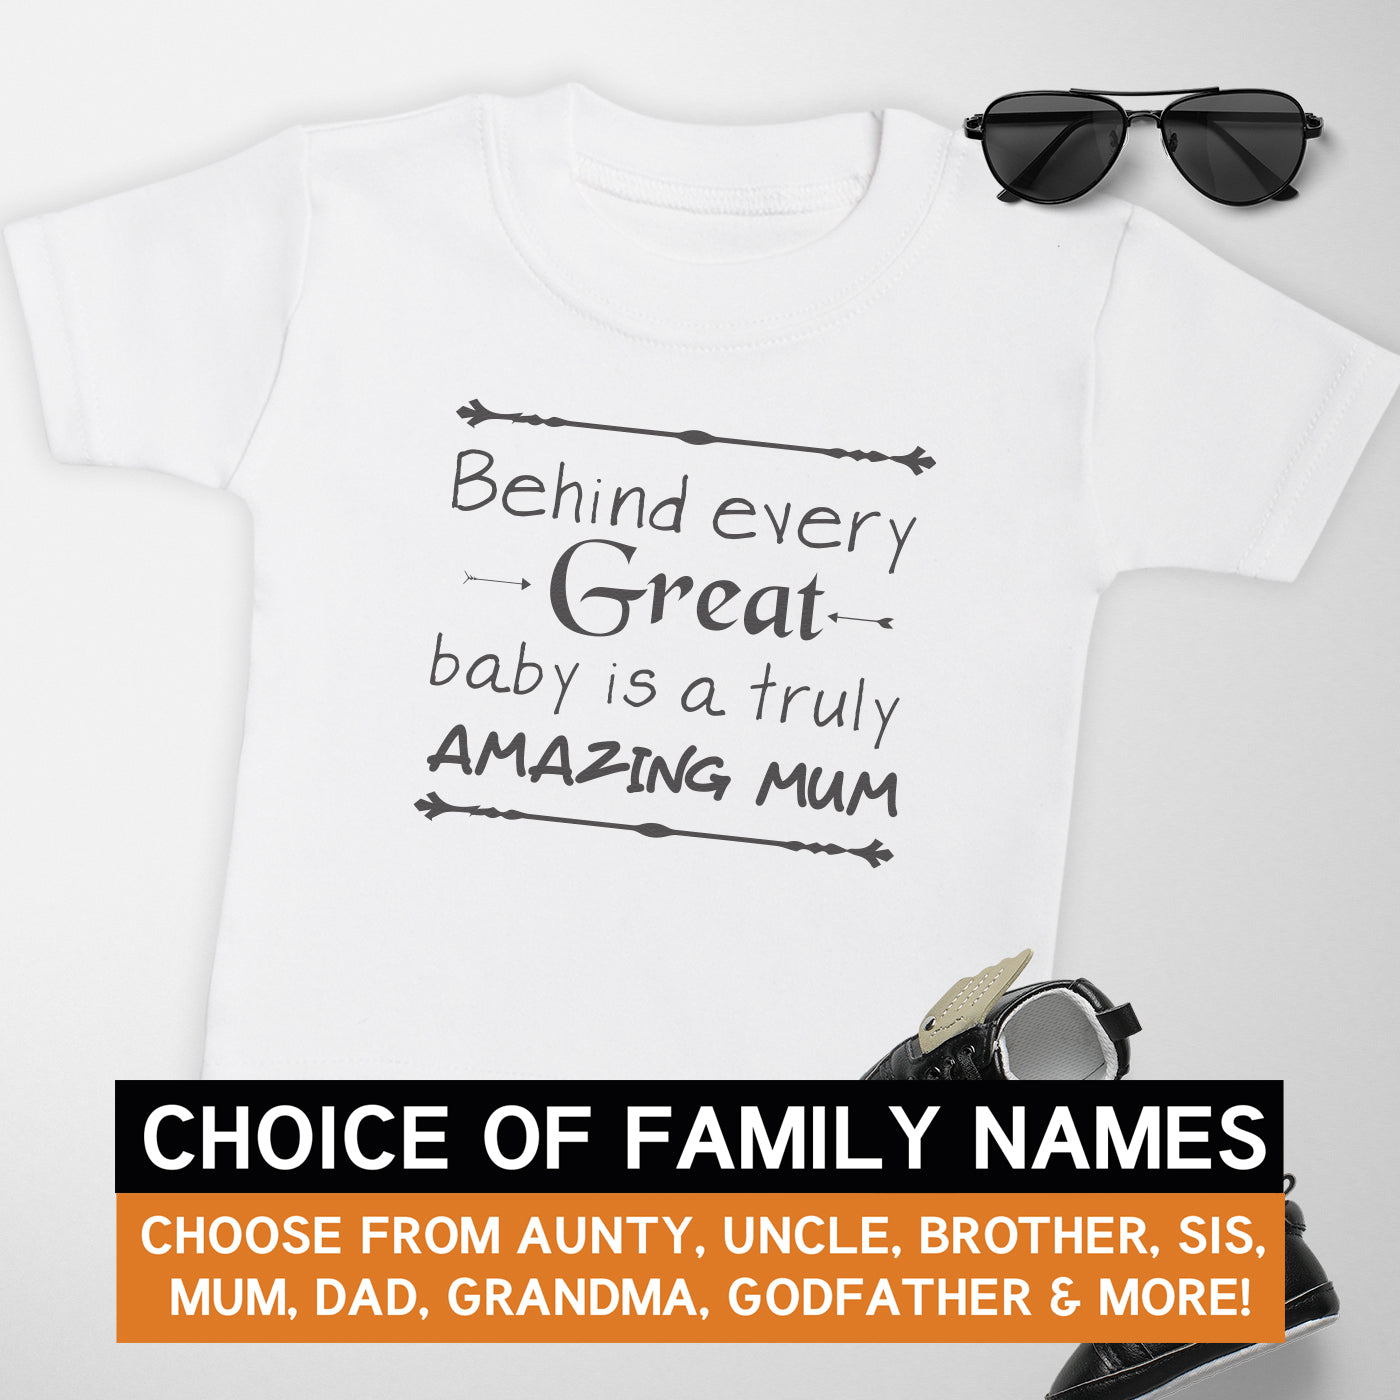 Pick A Family Name - Behind Every Great Baby Is Amazing Mummy, Auntie, Grandad and more - Baby & Kids T-Shirt